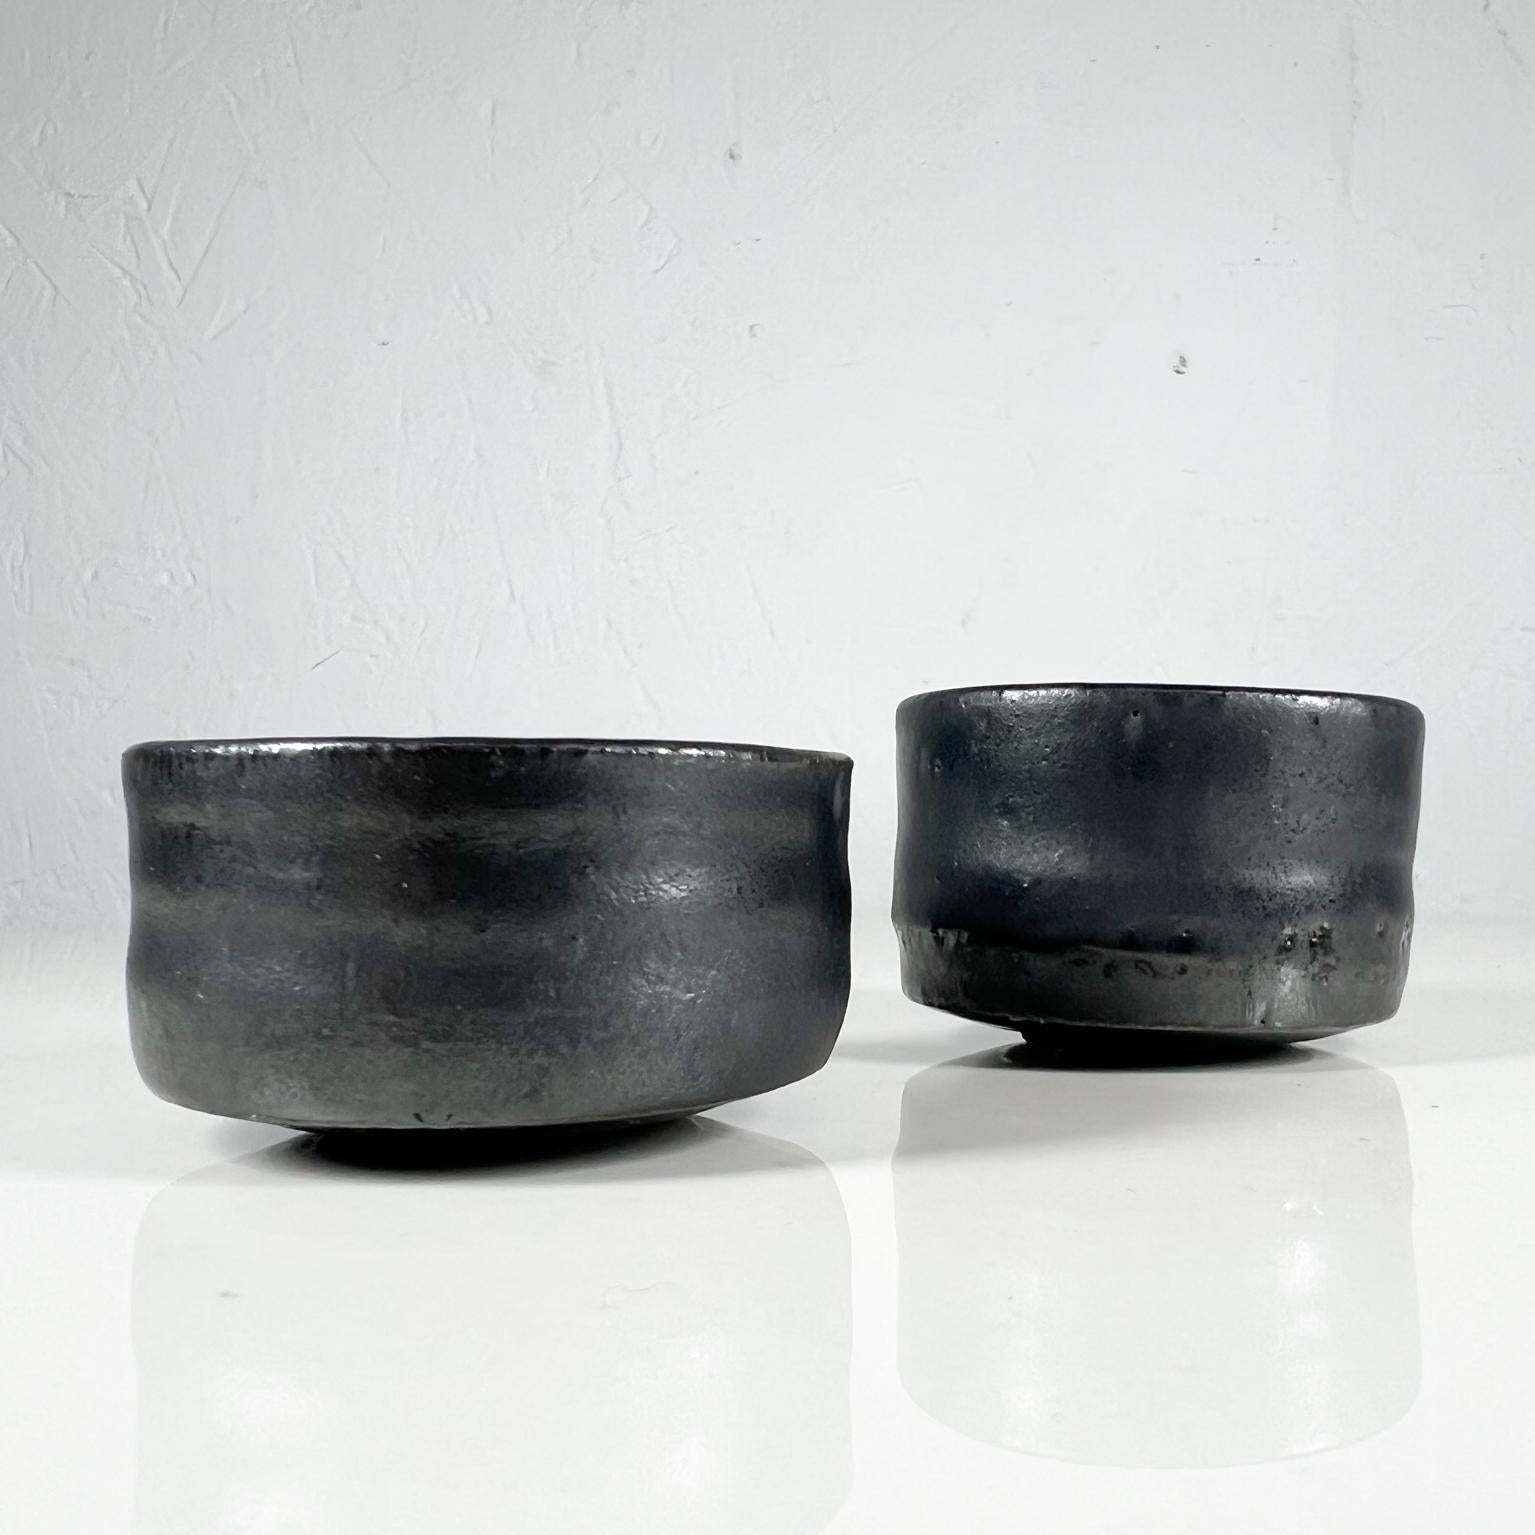 Modern Vintage black pottery Art sculptural mini vases dipping bowls 
Tall 1.5 tall x 2.25 diameter Small 1.25 tall x the x 2.25 diameter
Preowned unrestored vintage condition.
See images provided.
 